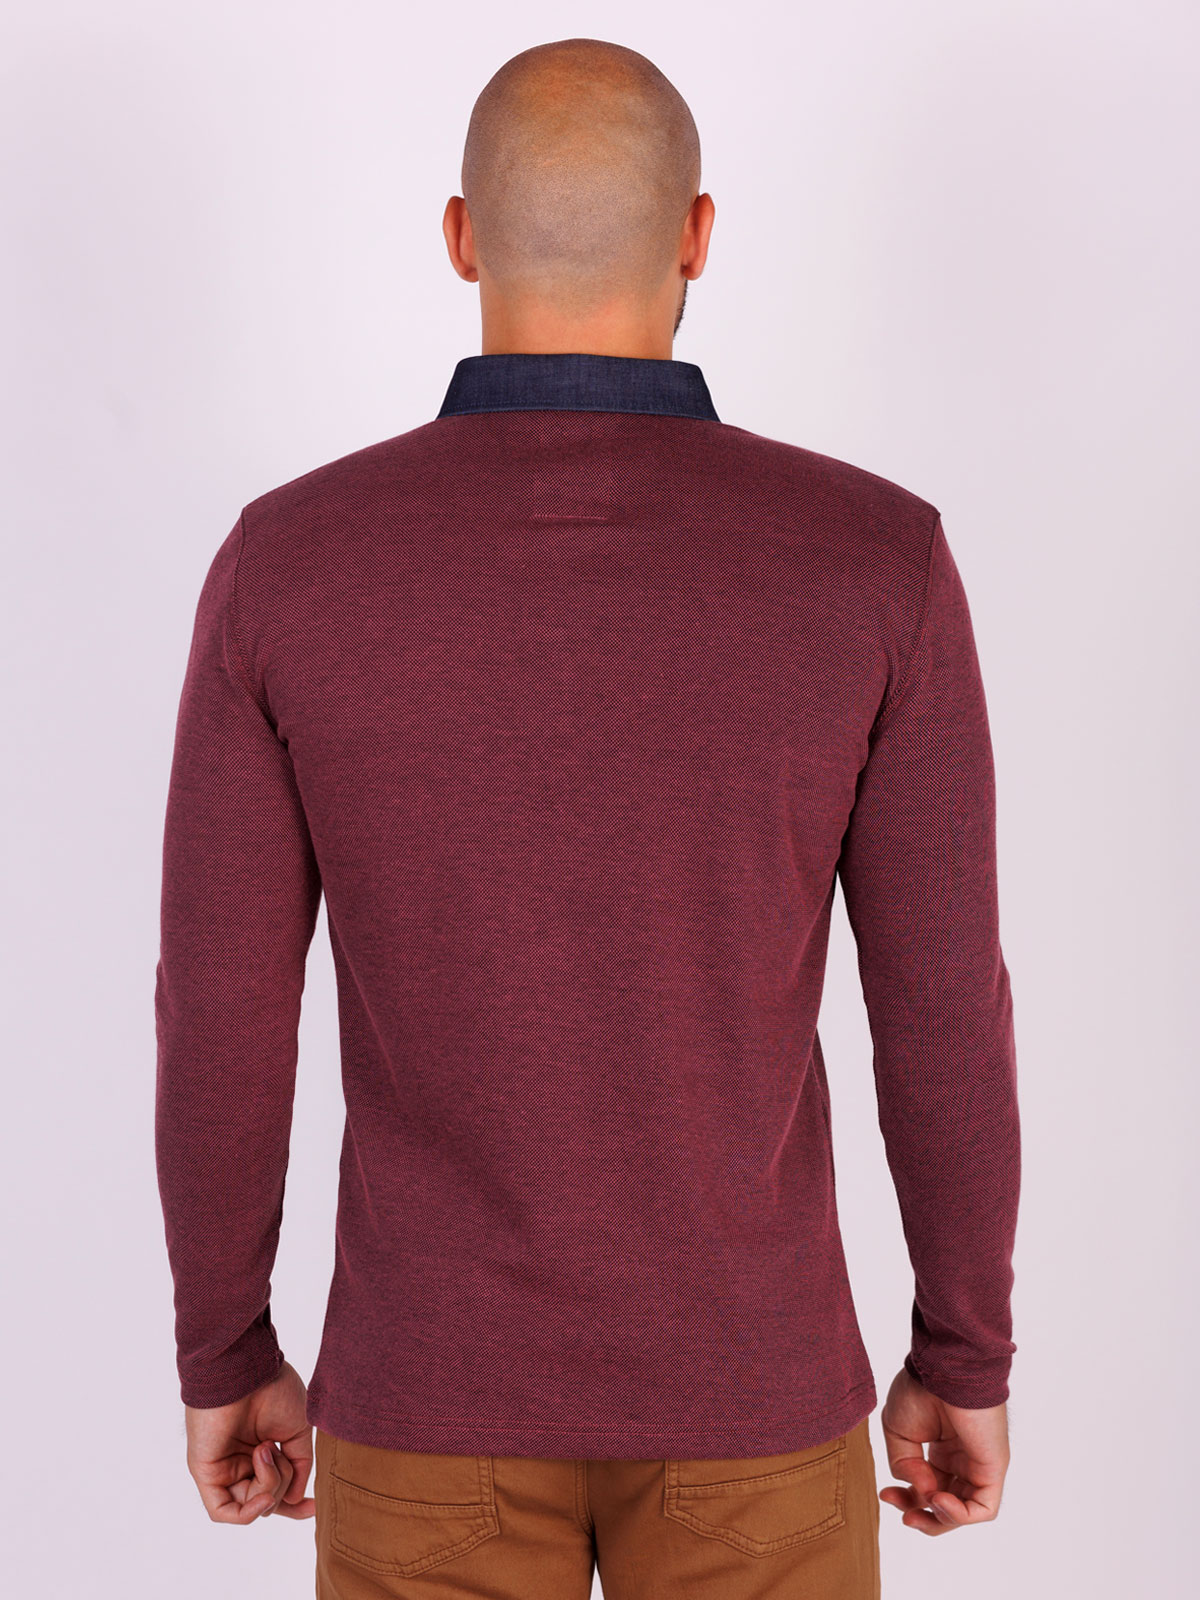 Mens blouse in raspberry color - 18273 € 35.43 img2